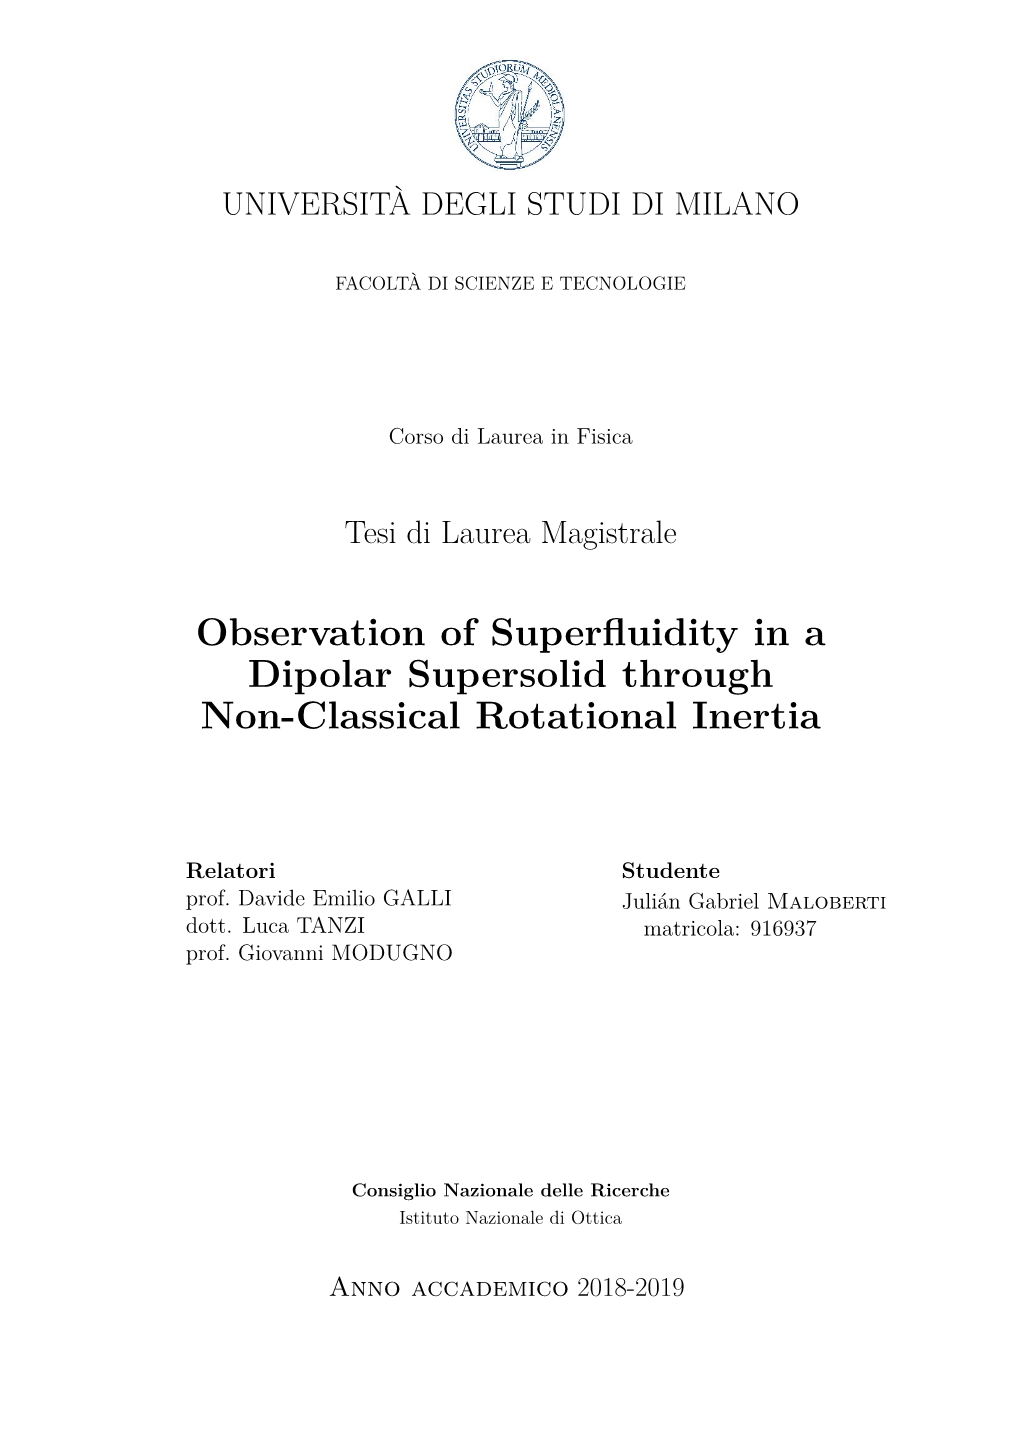 Observation of Superfluidity in a Dipolar Supersolid Through Non